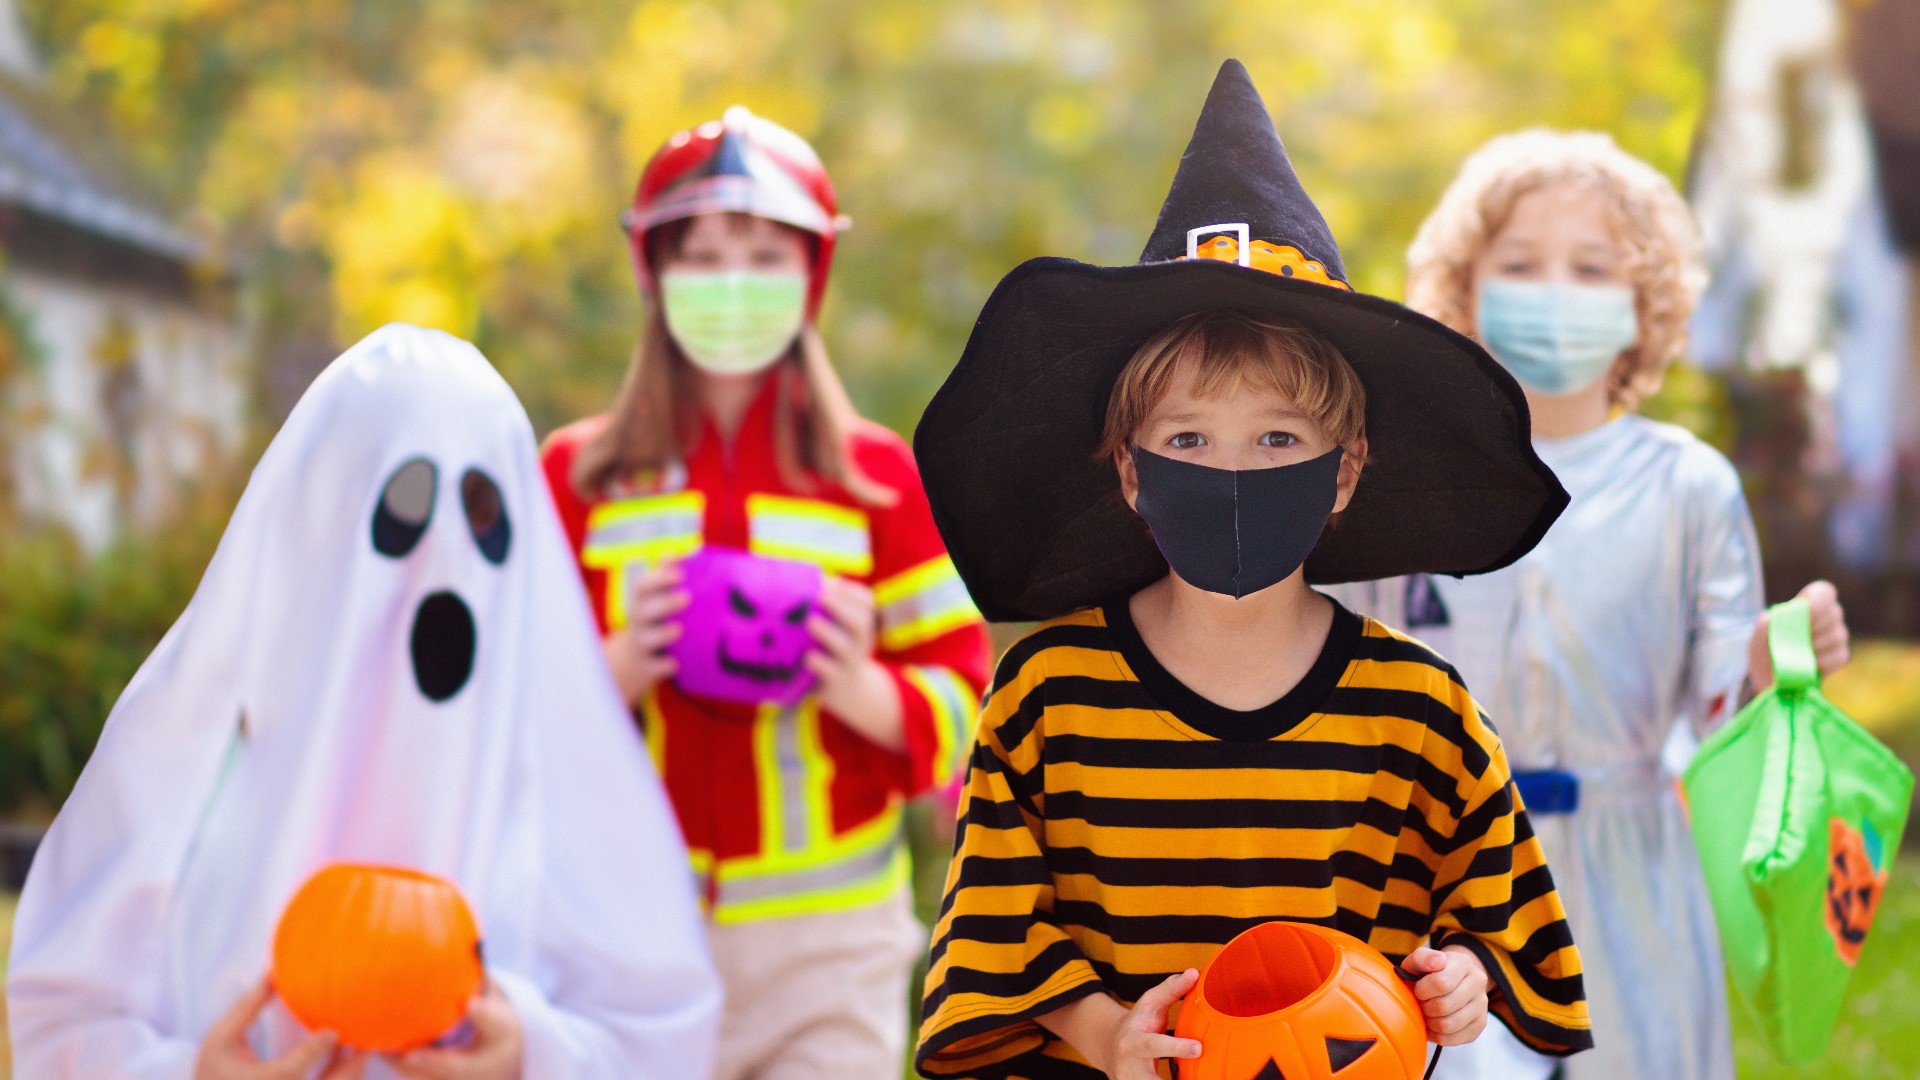 Trick-or-treat night is annually one of the most dangerous nights of the year for children.